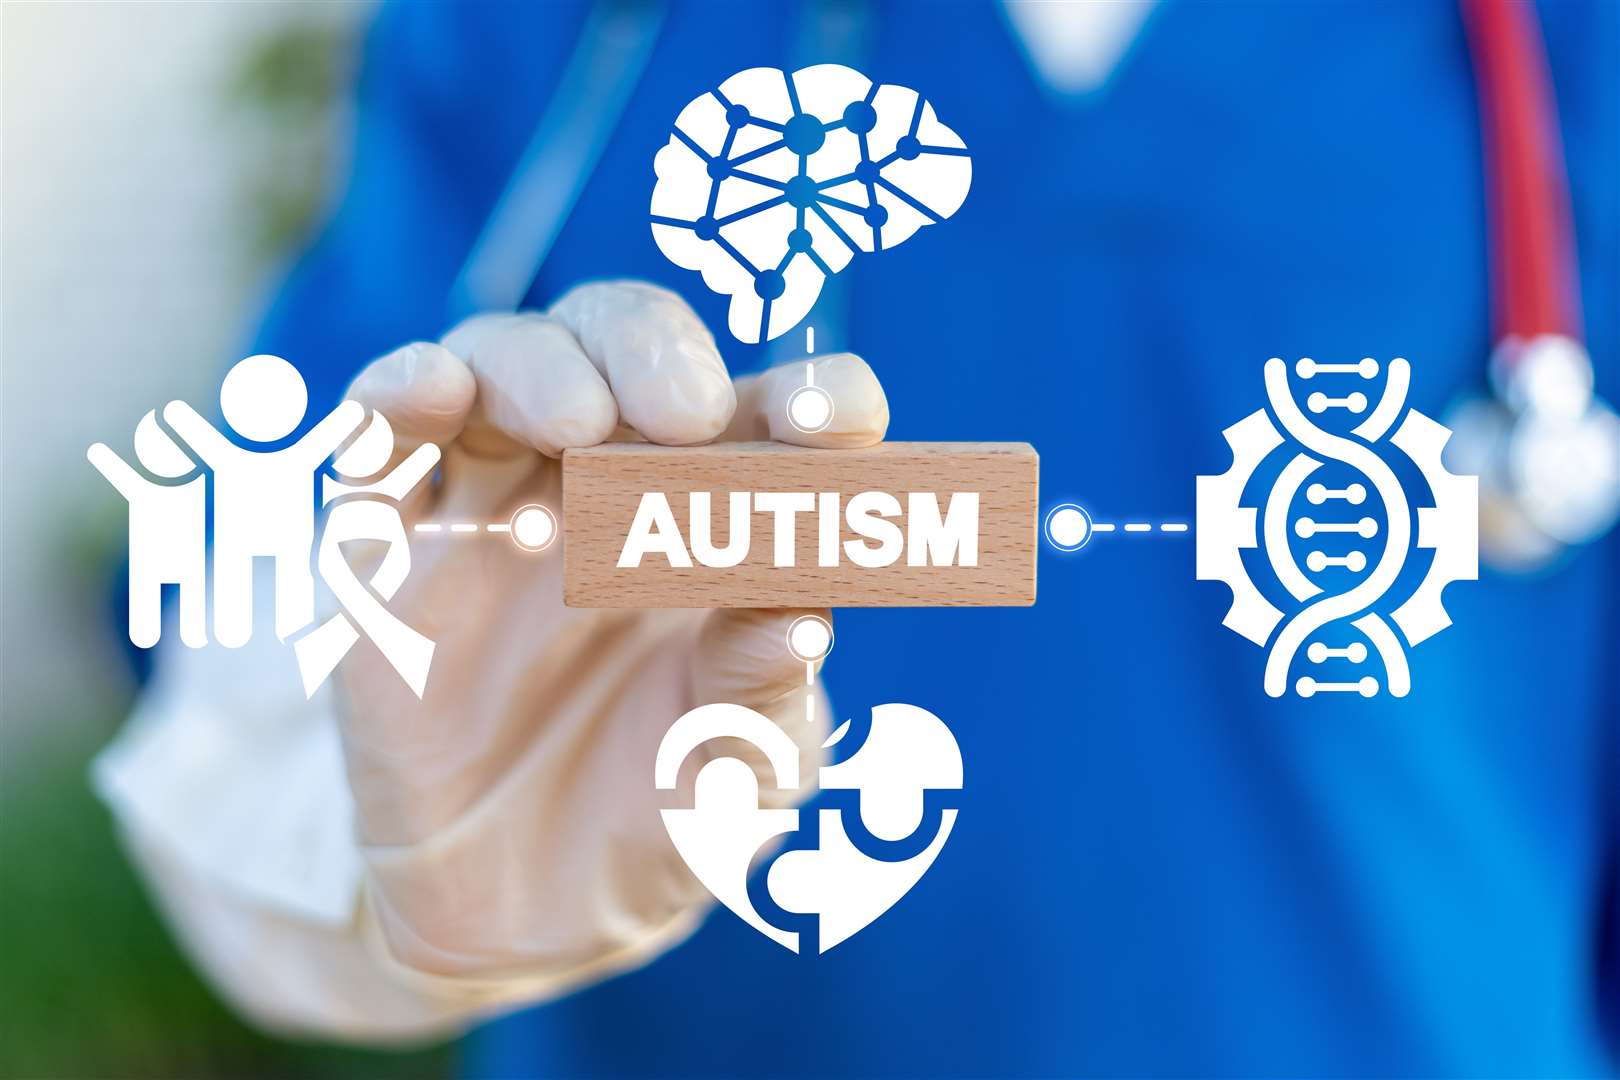 A survey revealed how badly coronavirus has affected disabled children and young people, especially those with autism, who are "really struggling with the changes to their routines", according to Jamie Stone.